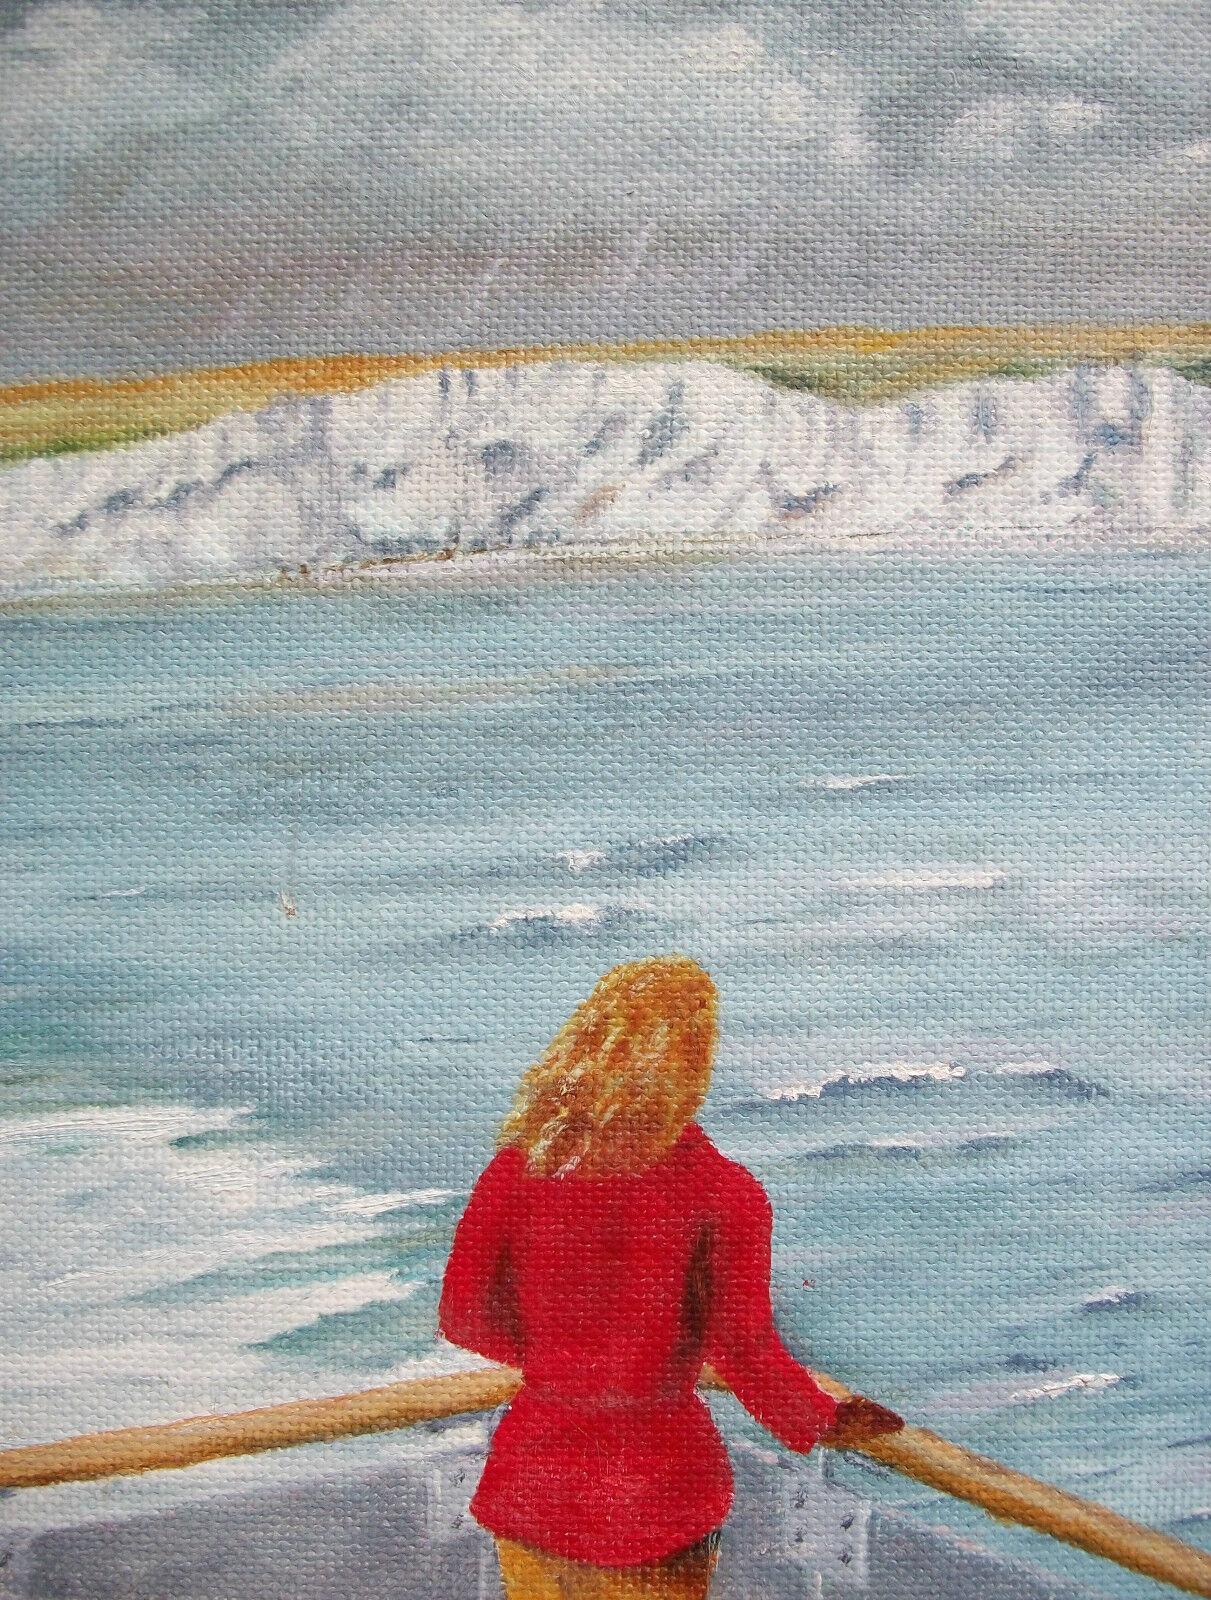 Modern DAVID LANGDON - 'Cliffs of Dover' - Contemporary Oil Painting - Signed - C. 2000 For Sale